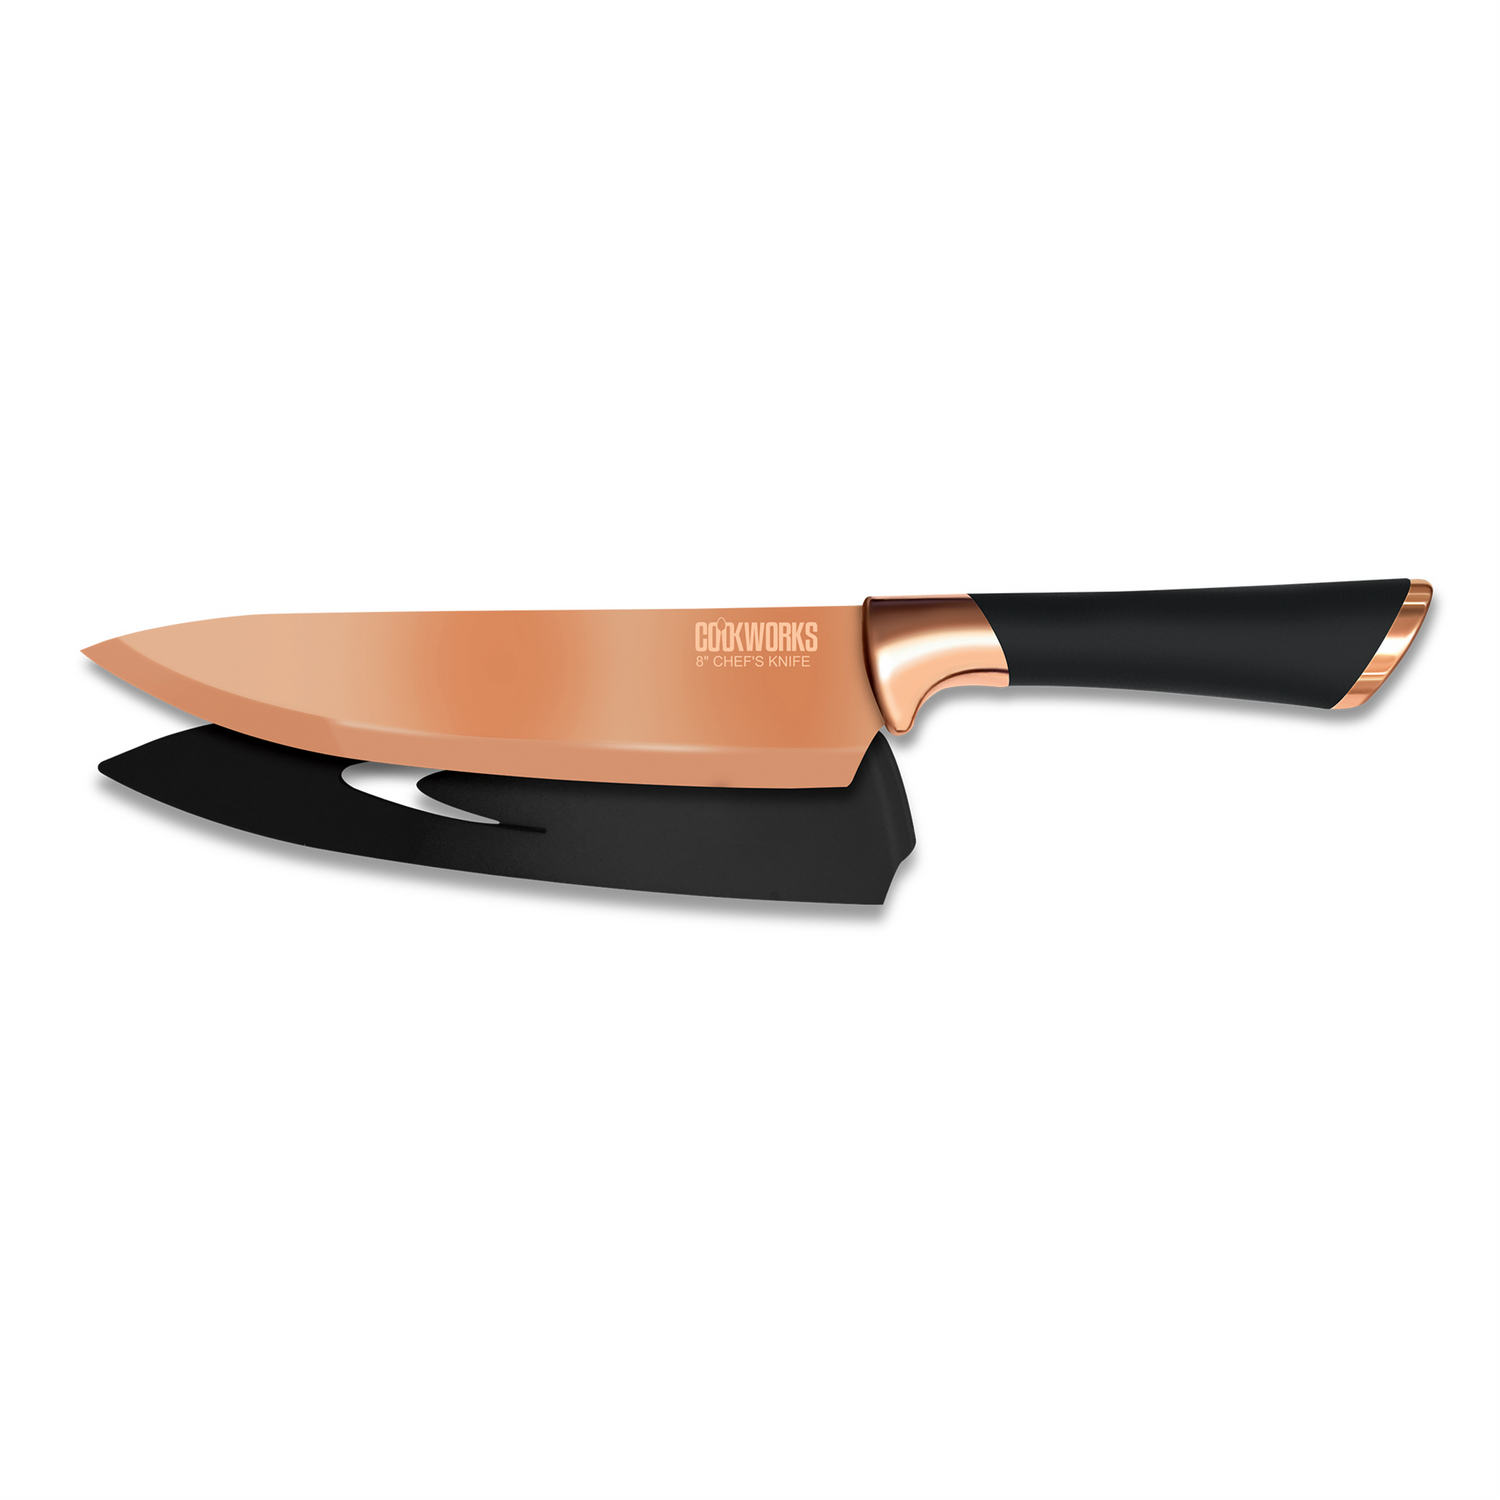 Disposable Wooden Knife 6. 5 in. - Sweet Flavor